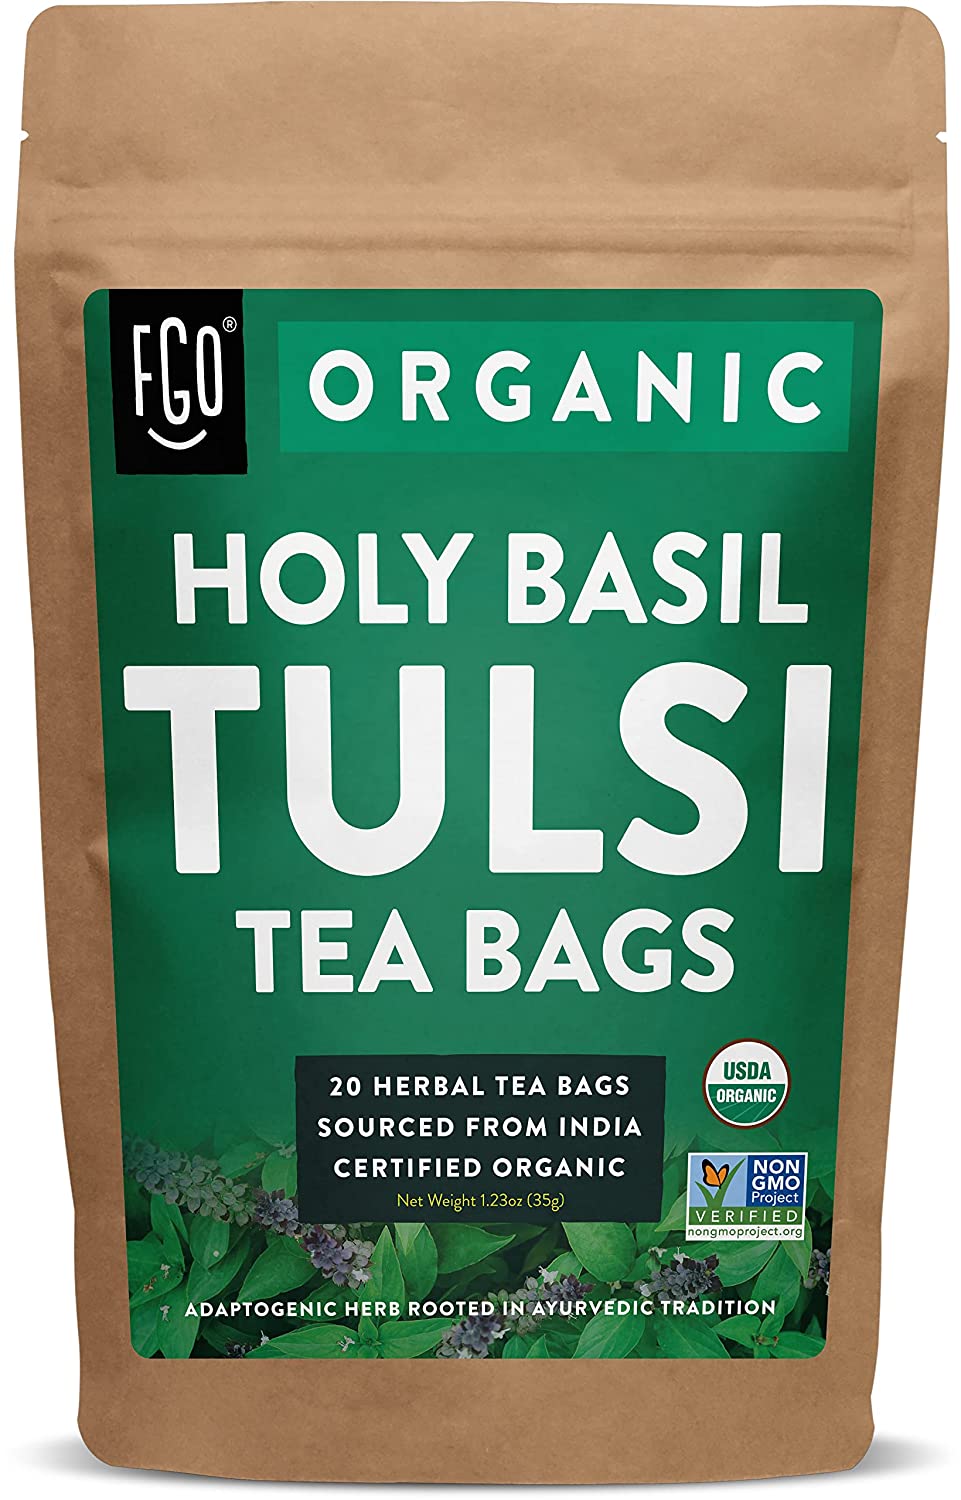 Style: Tea bags, Flavor Name: Tulsi, Size: 20 Count (Pack of 1)